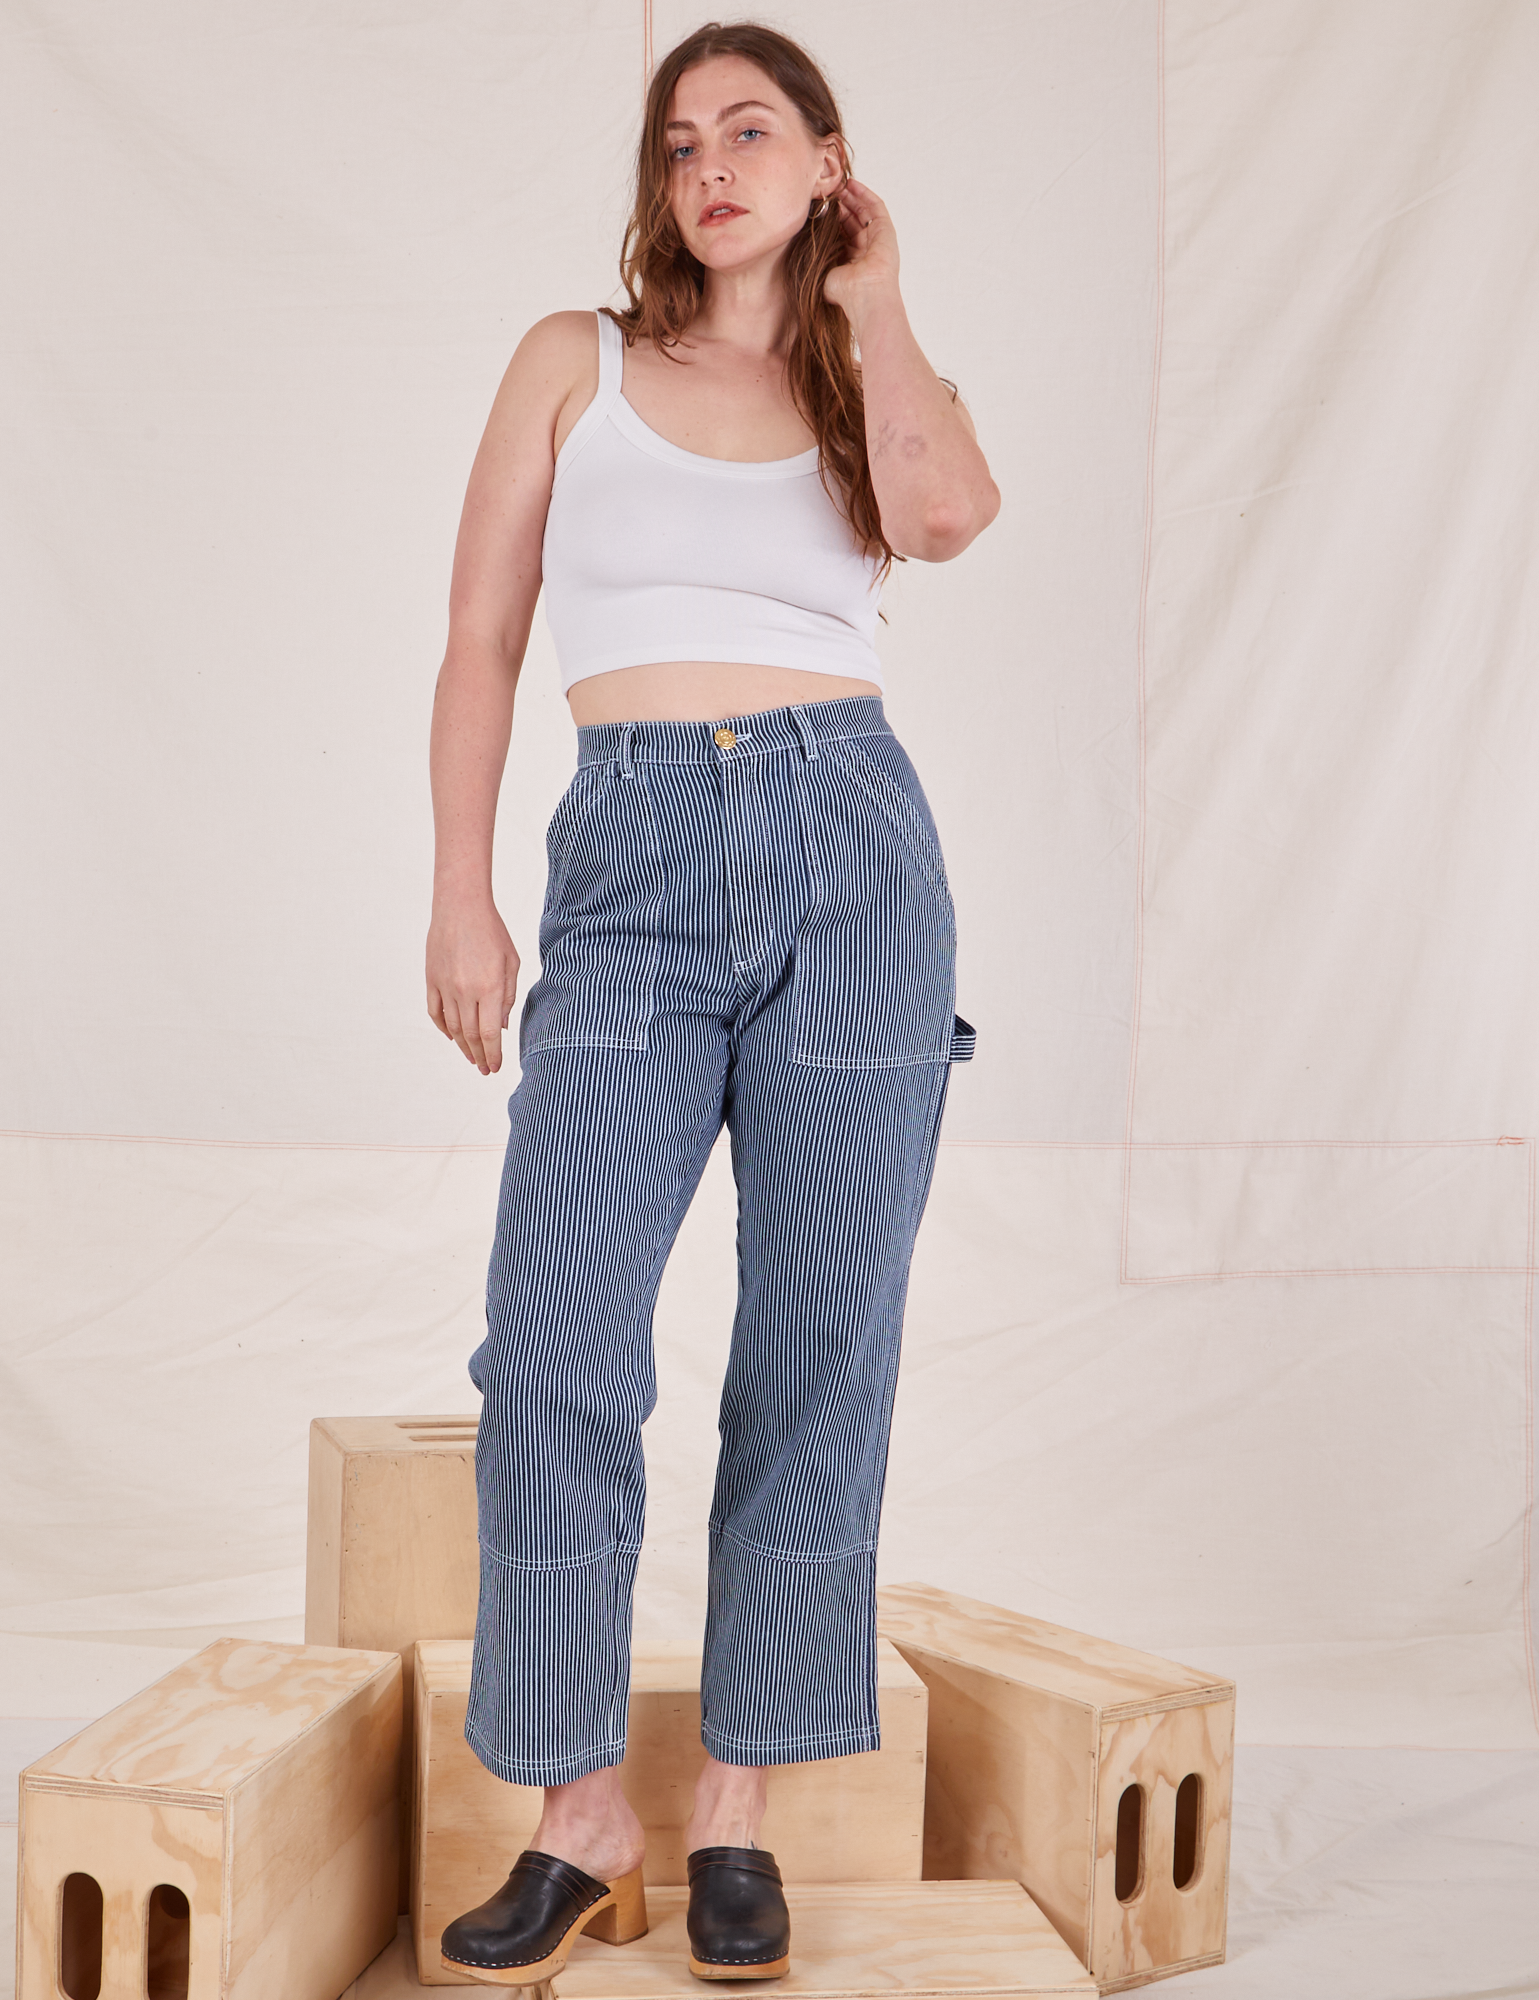 Allison is wearing Carpenter Jeans in Railroad Stripes and Cropped Cami in vintage tee off-white